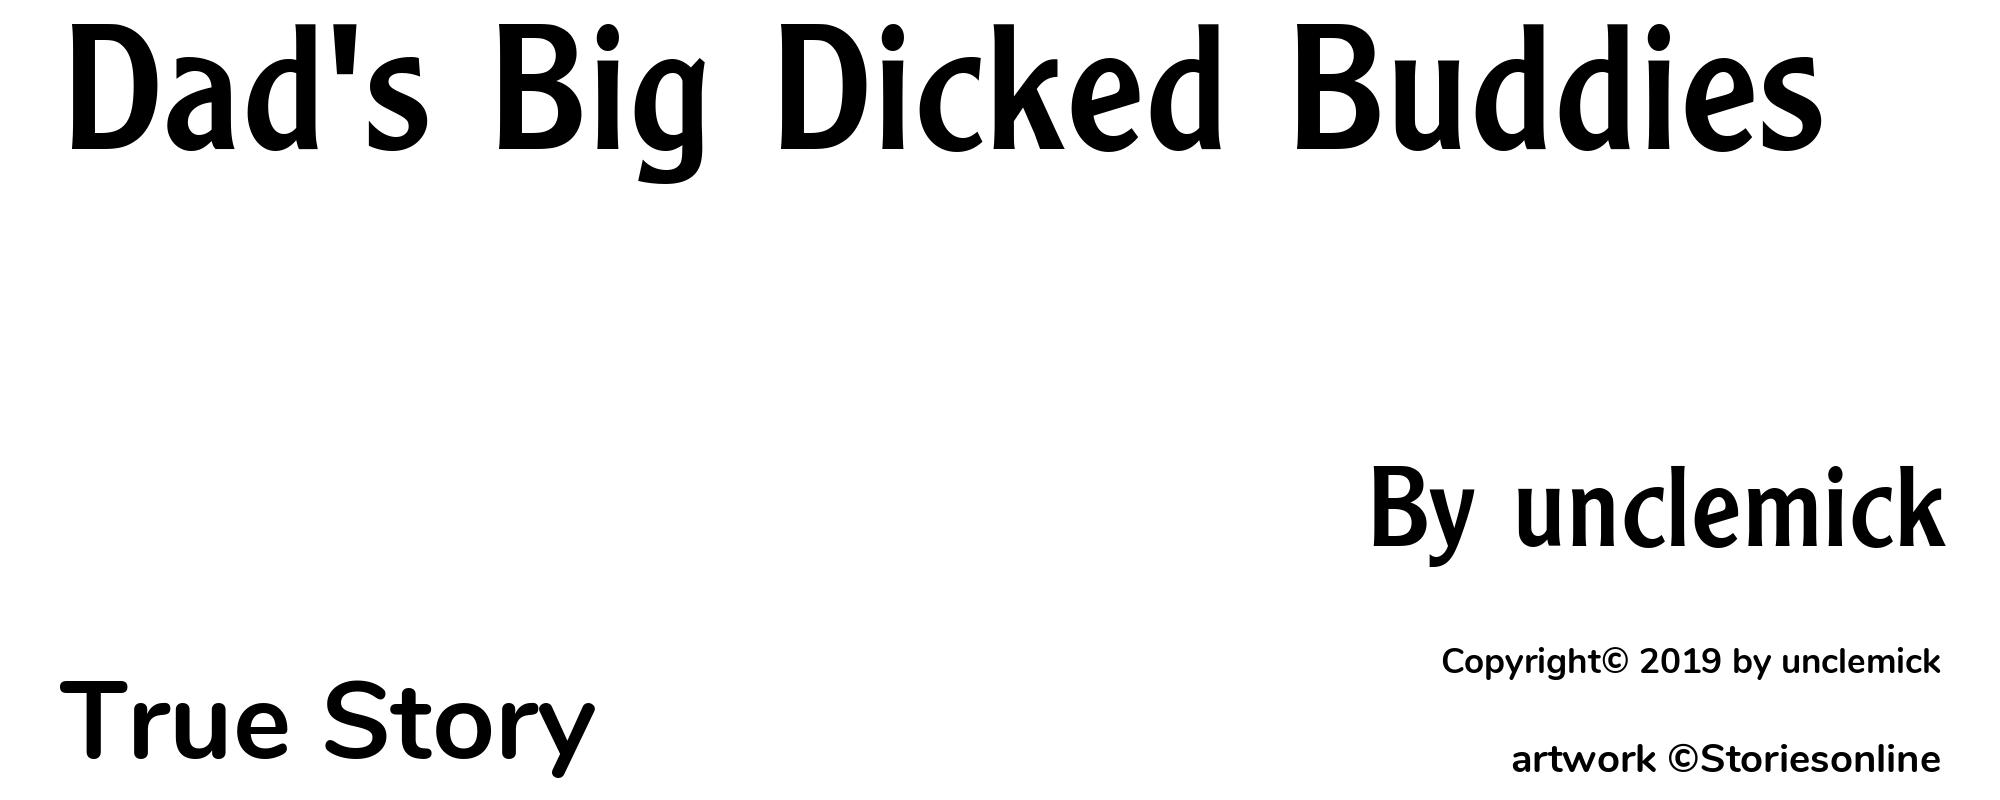 Dad's Big Dicked Buddies - Cover